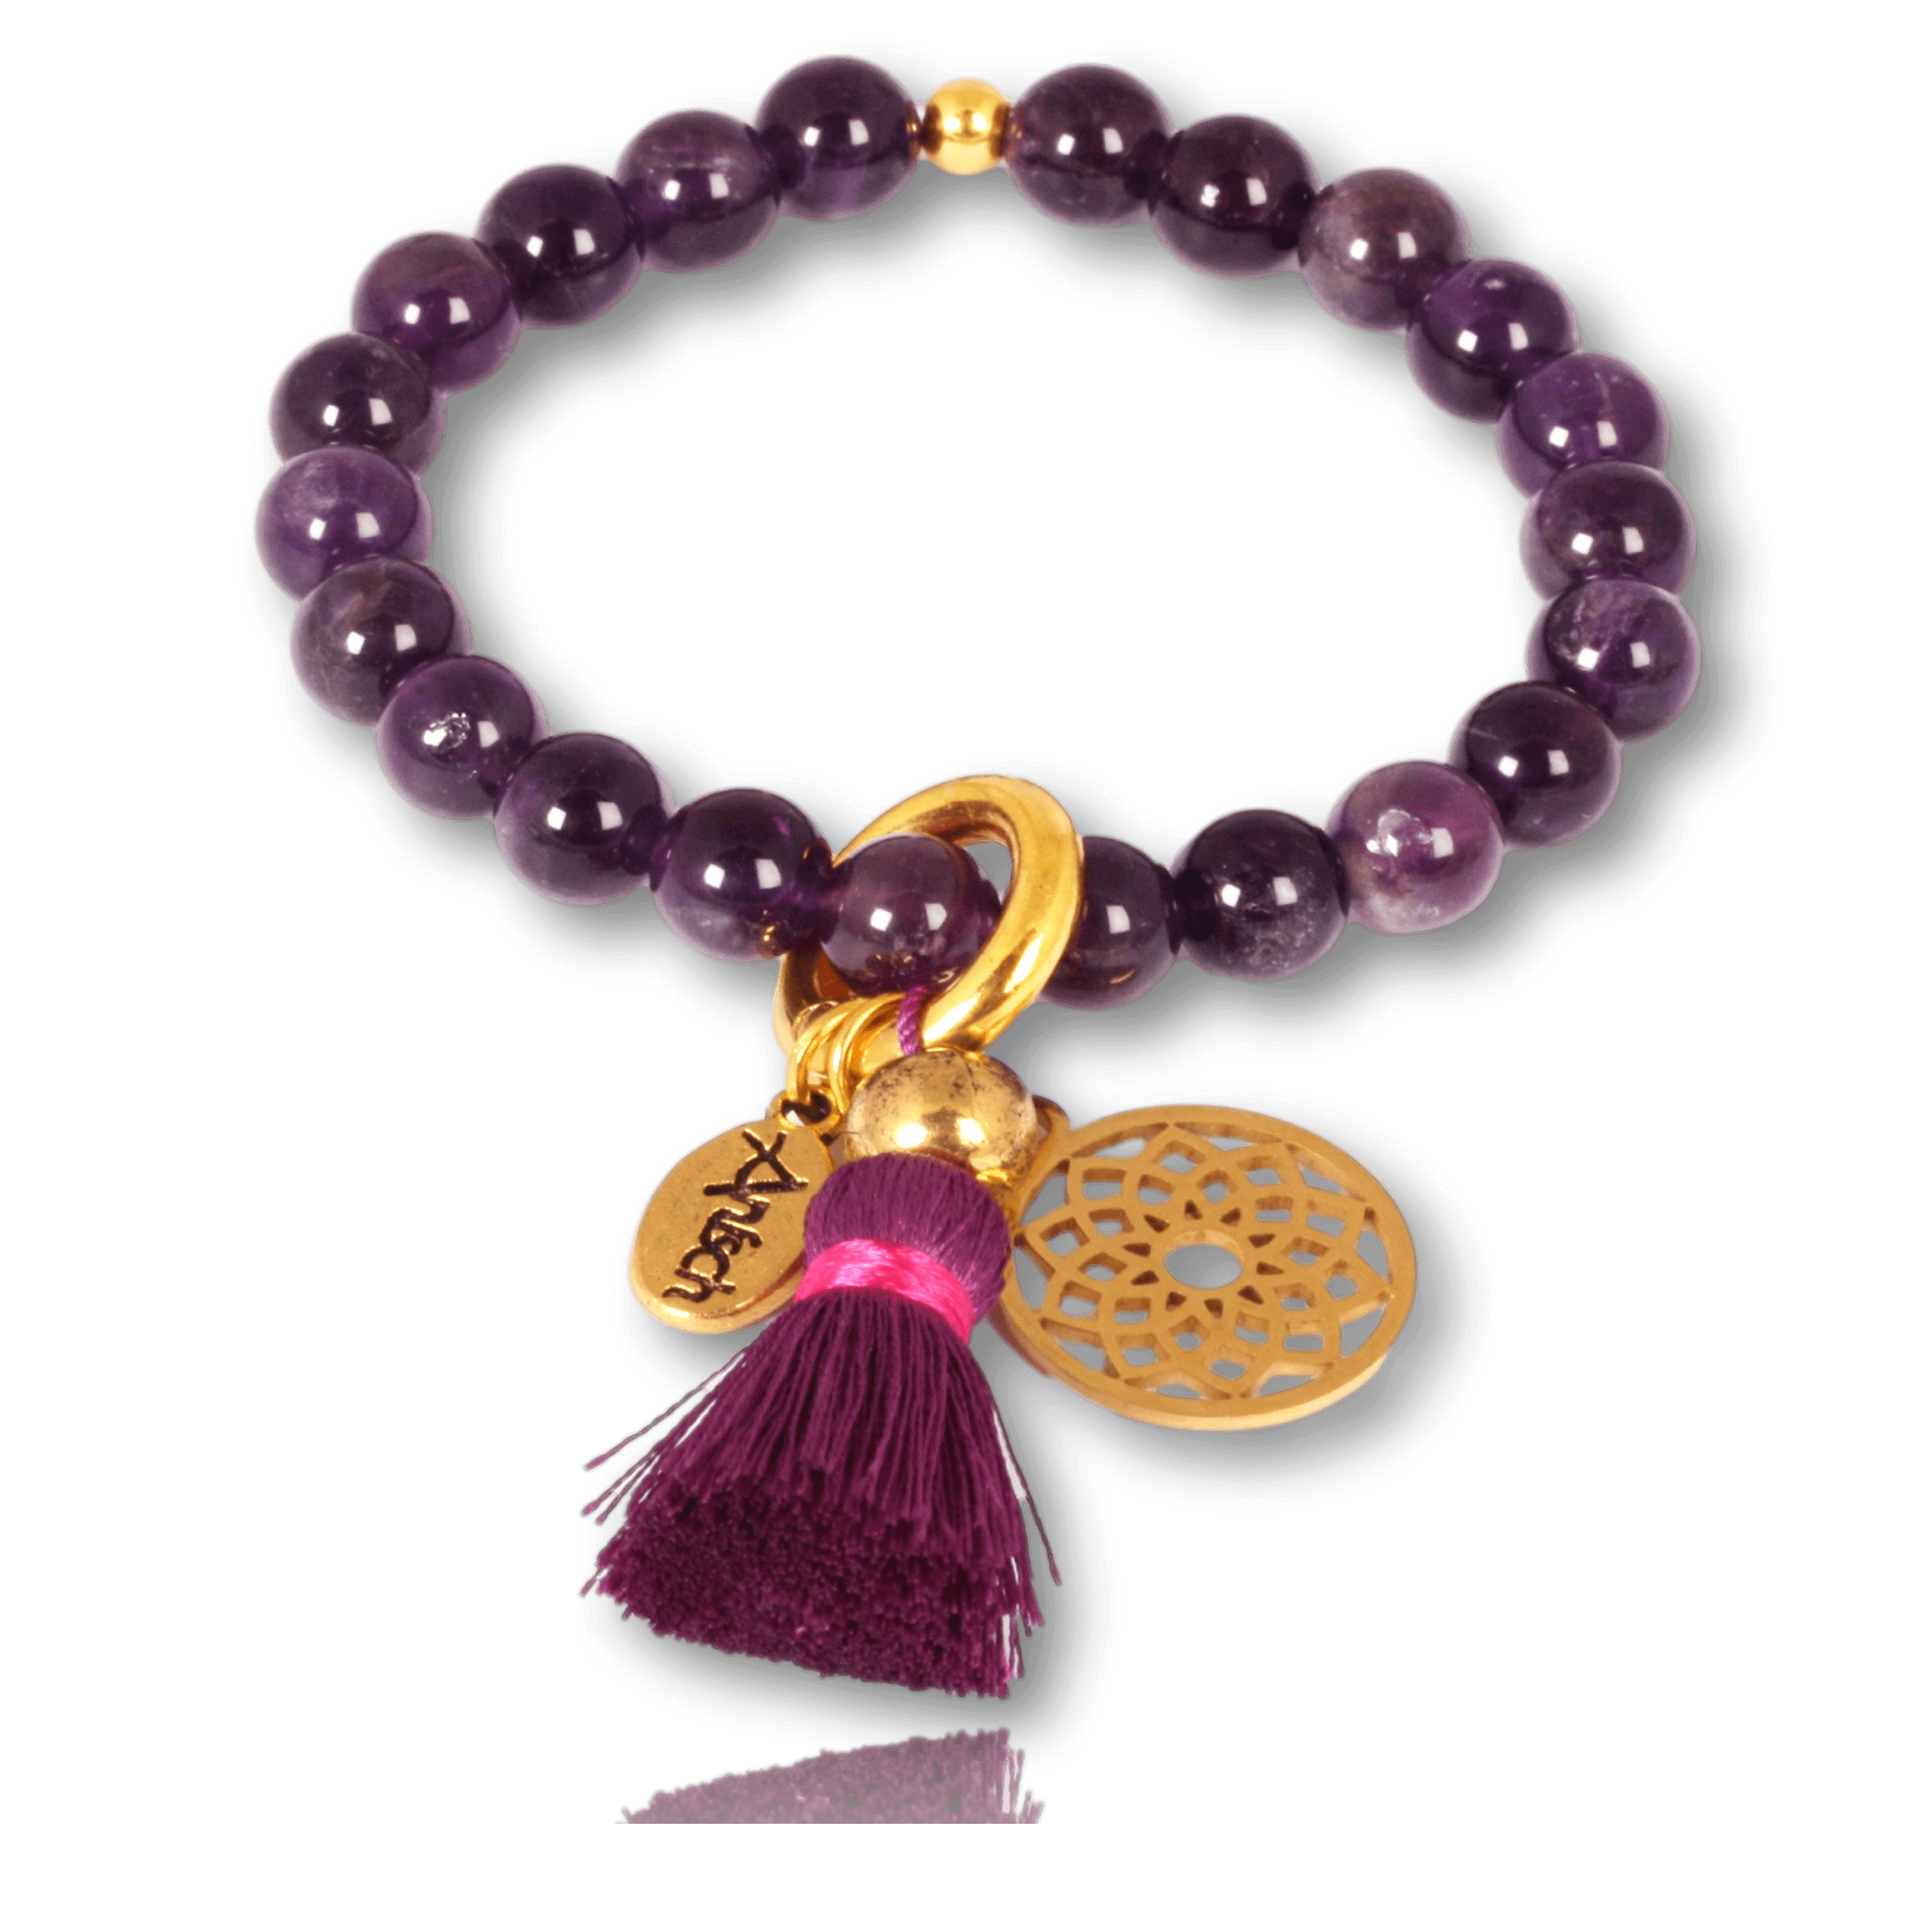 Amethyst gemstone bracelet gold-plated for your crown chakra: connection & fullness